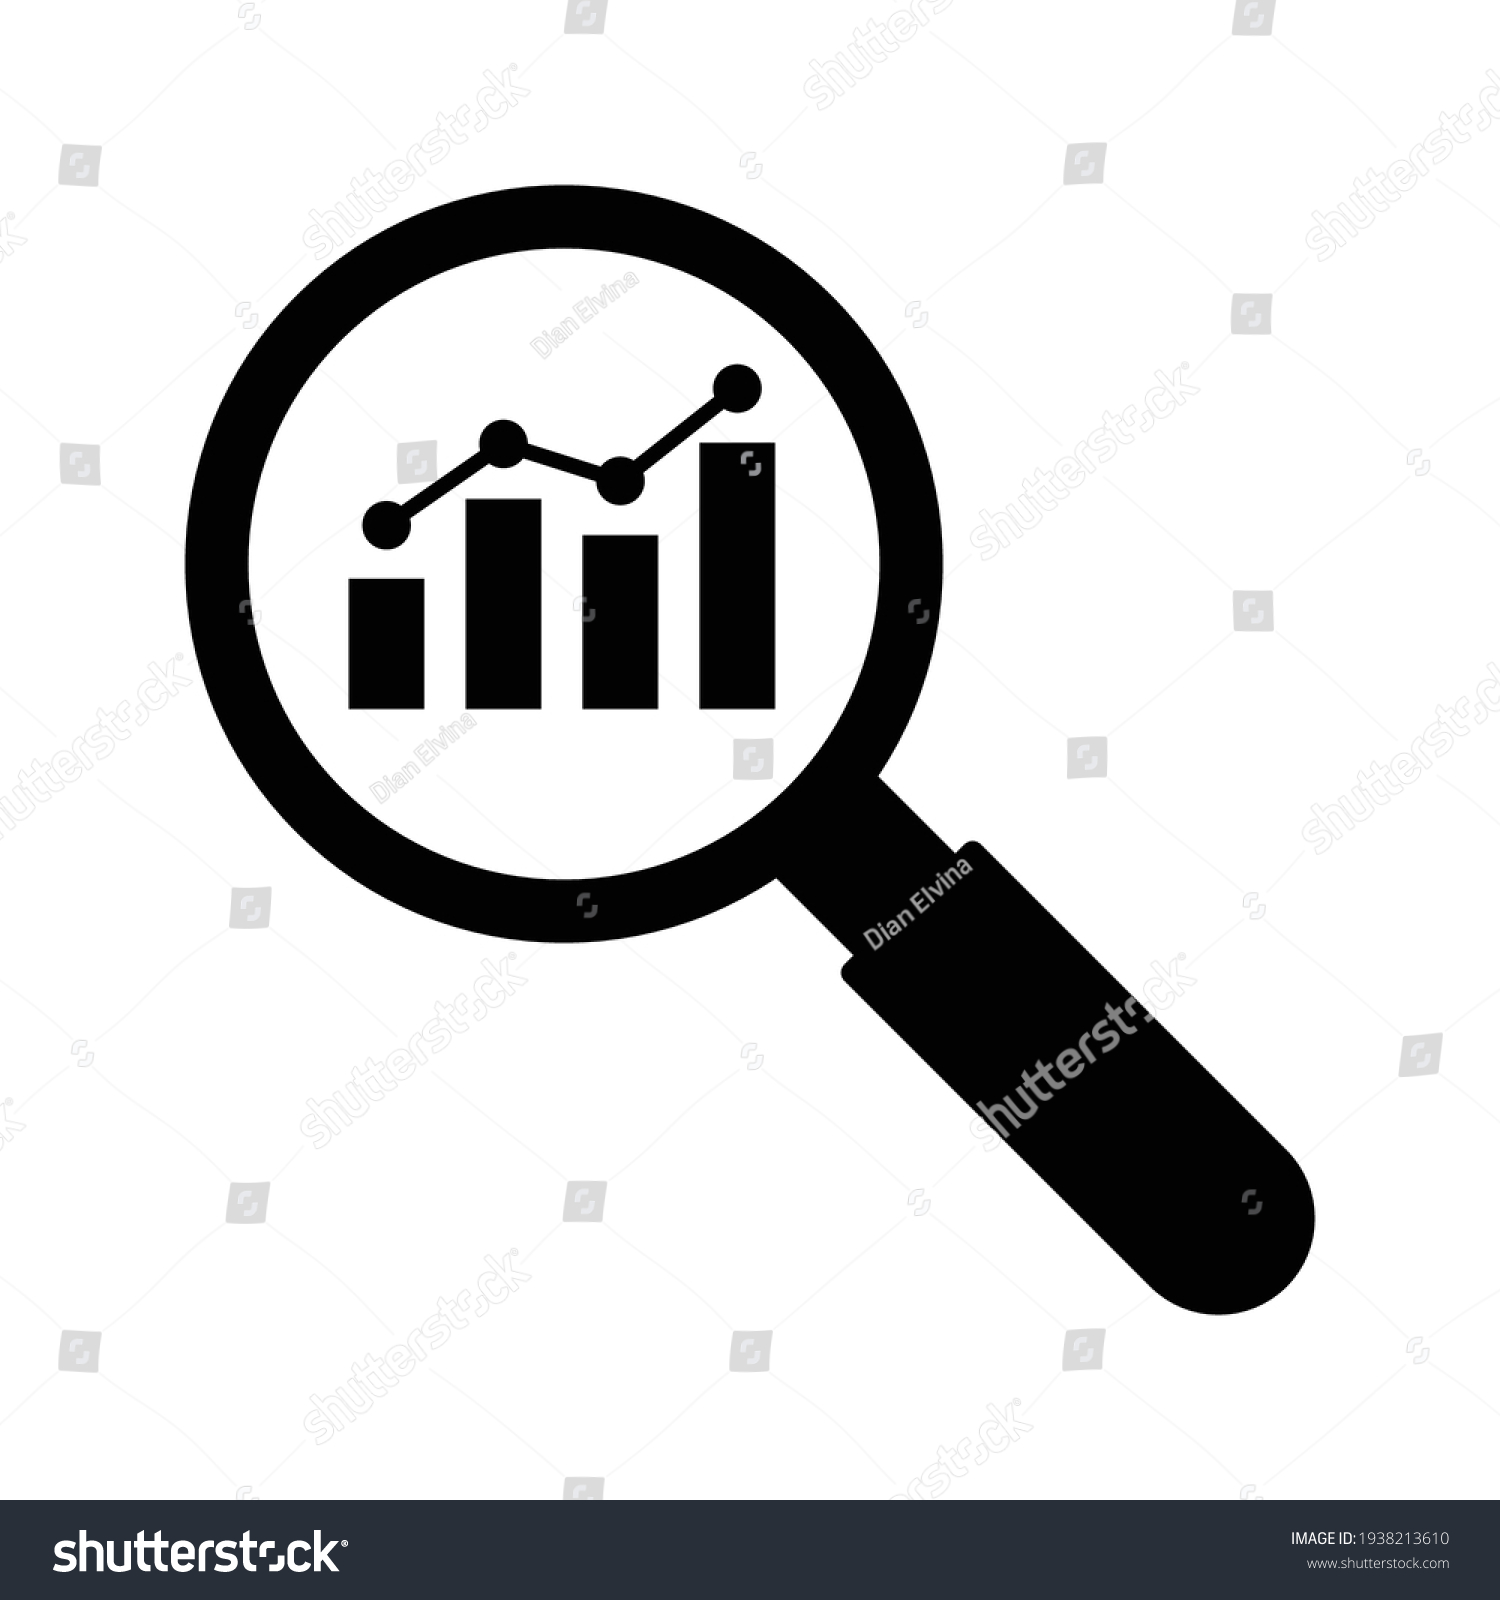 graph analysis business icon vector #1938213610